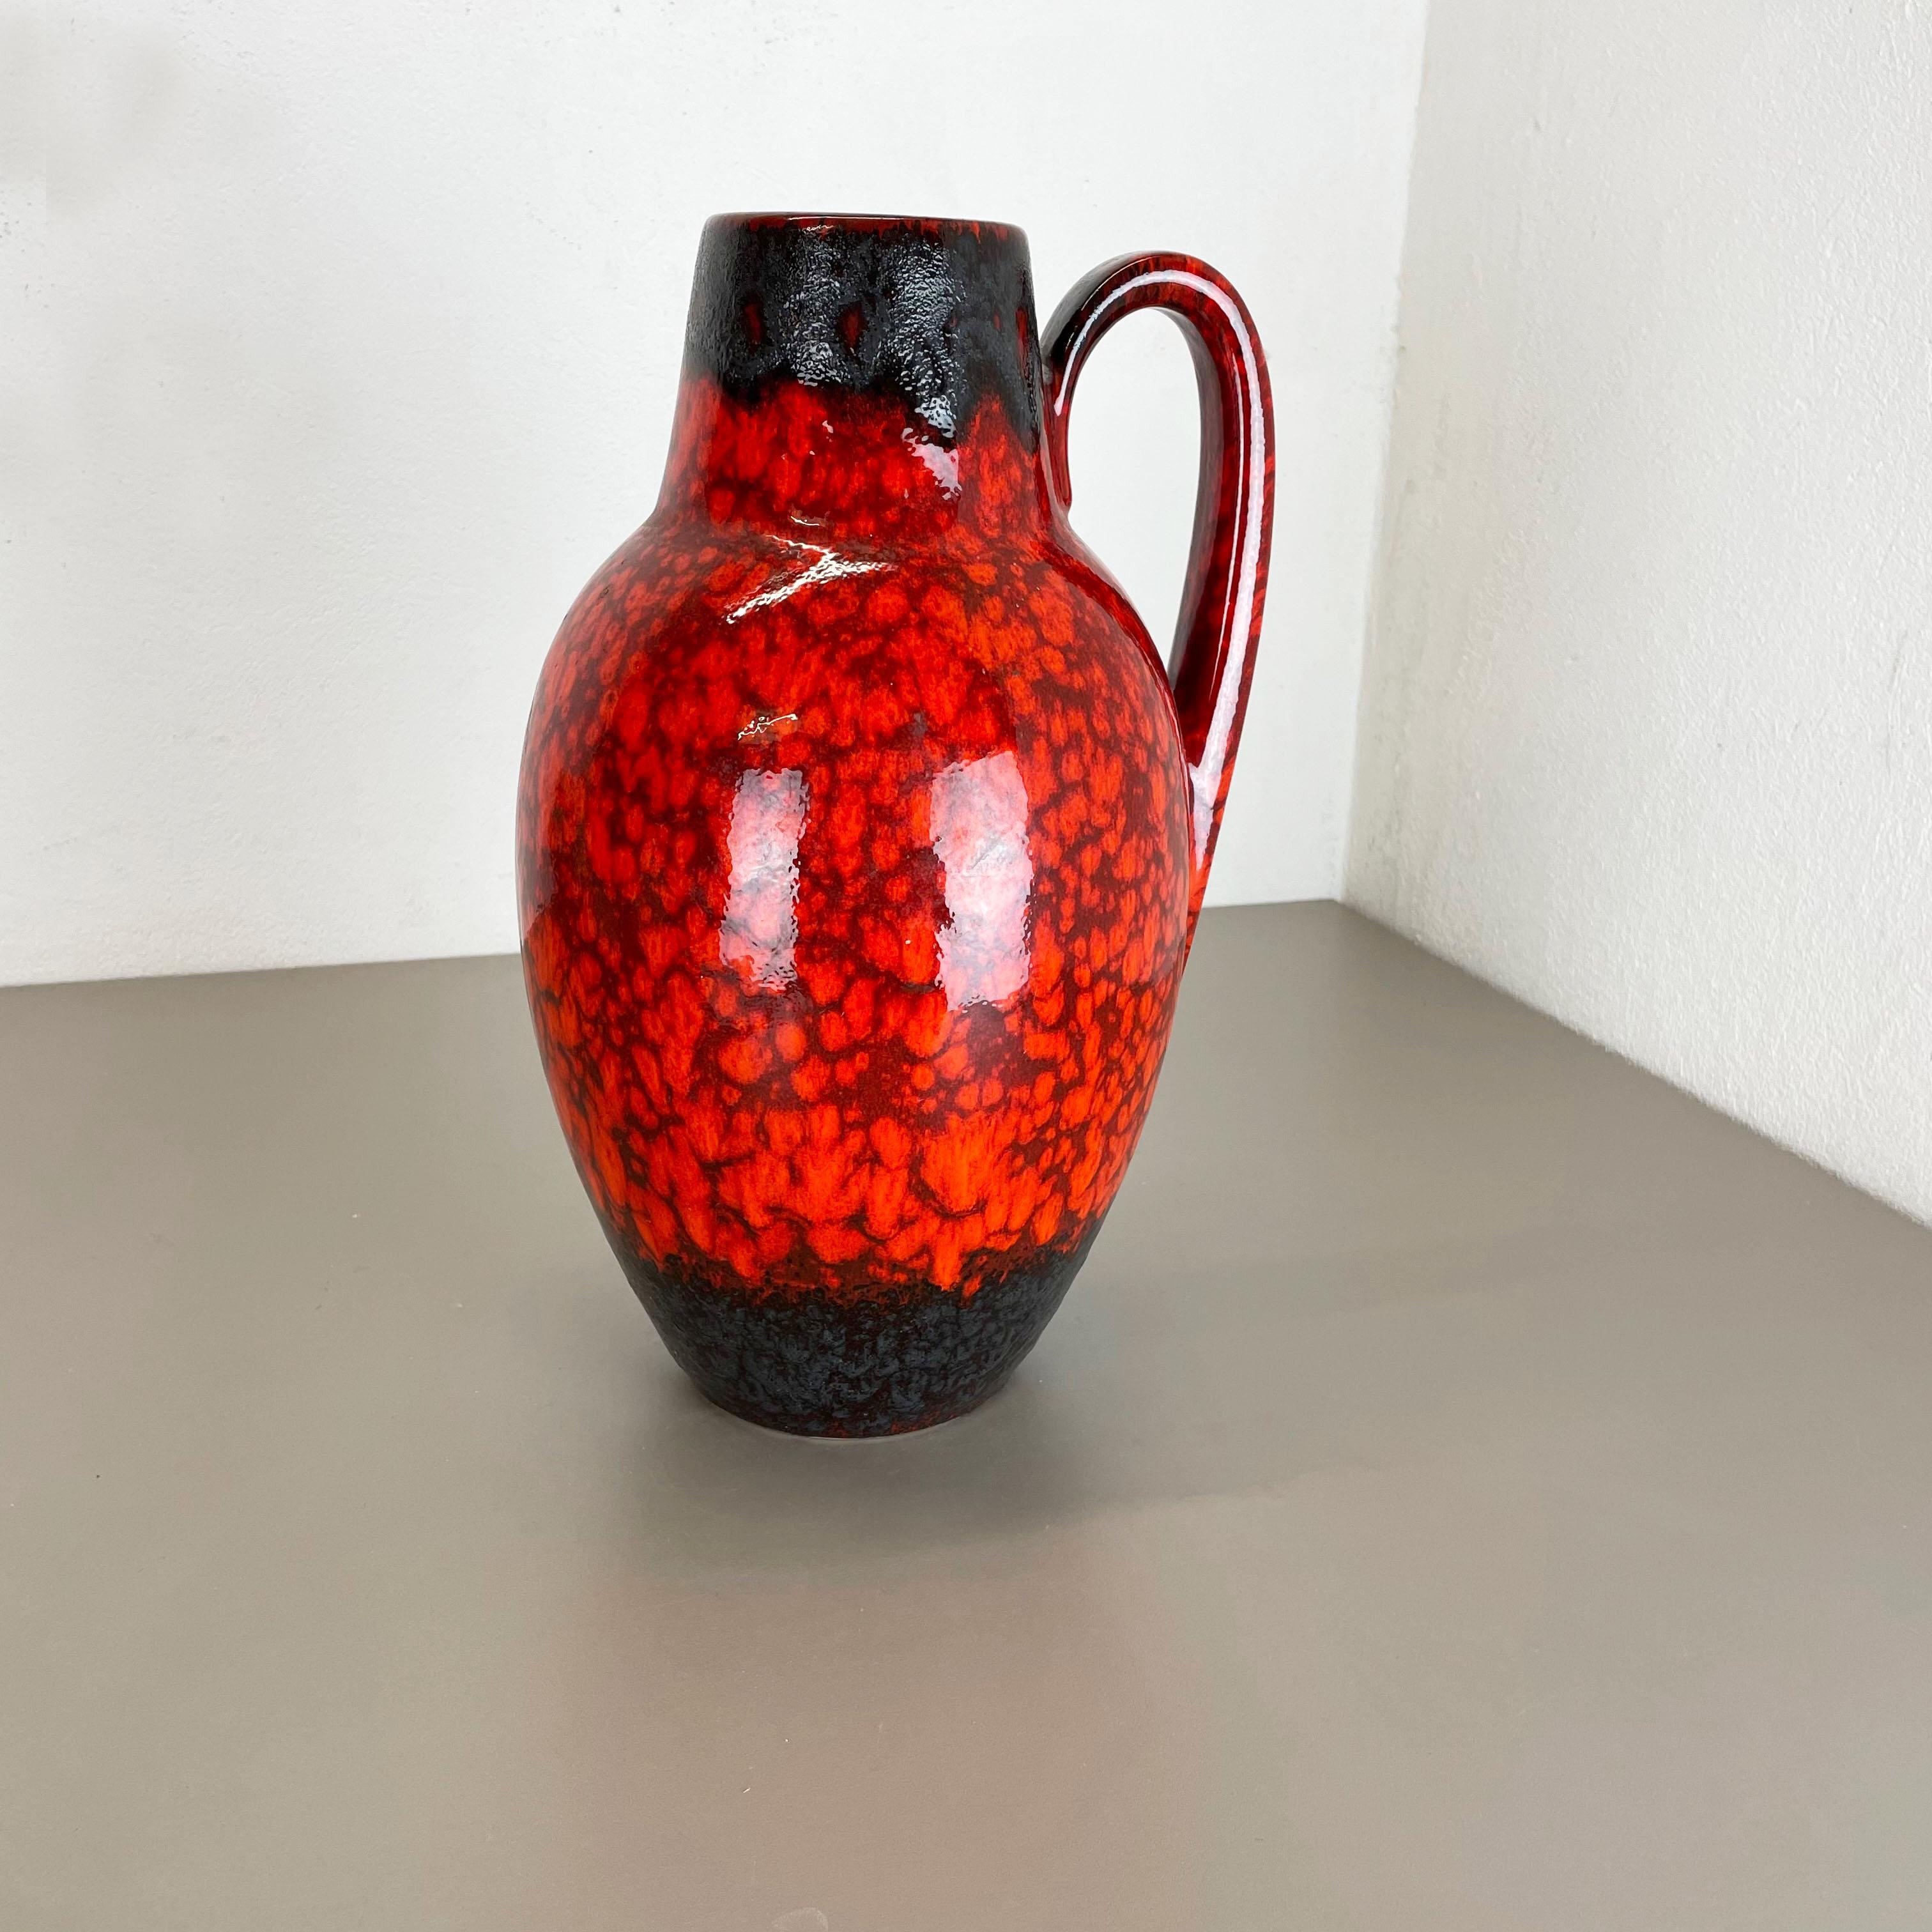 Article:

Fat lava art vase extra large version


Model: 414-38


Producer:

Scheurich, Germany



Decade:

1970s


Description:

This original vintage vase was produced in the 1970s in Germany. It is made of ceramic pottery in